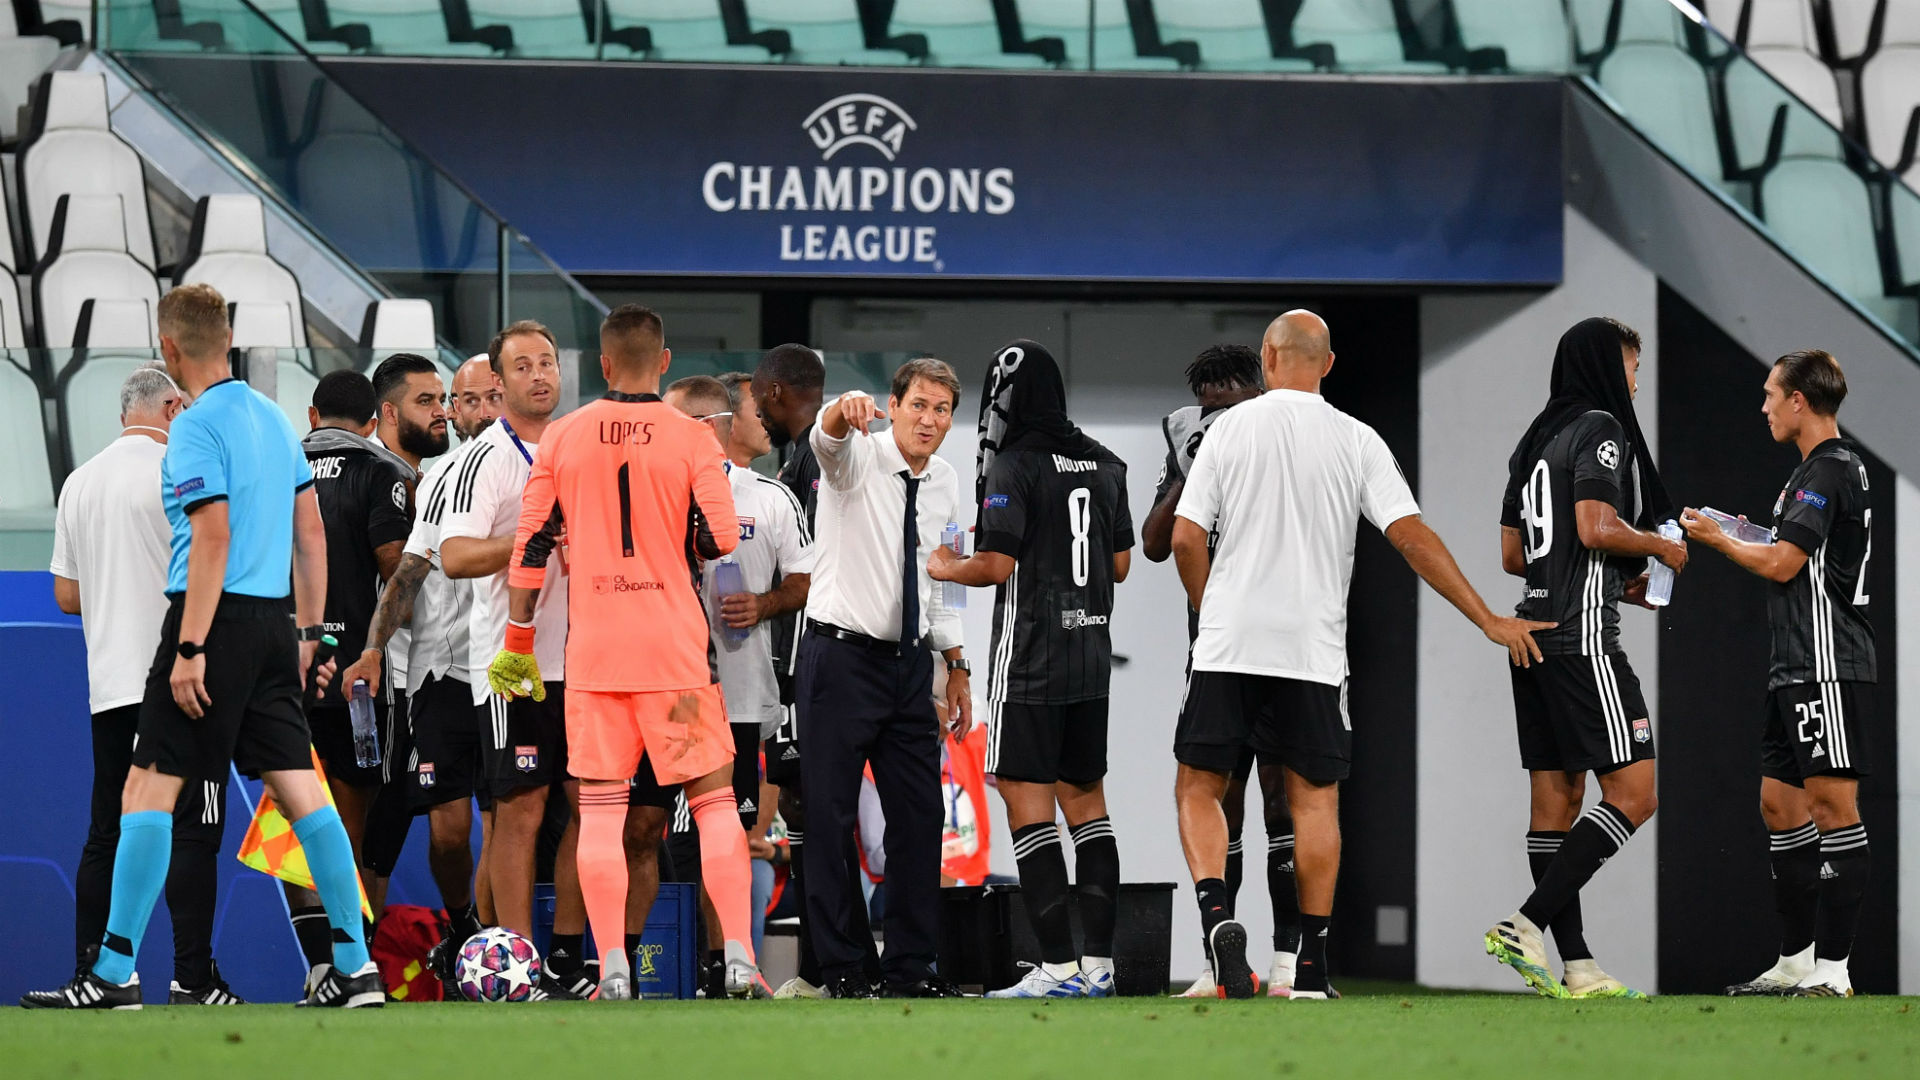 Lyon lost to Juventus on Friday, but progressed to the Champions League quarter-finals courtesy of the away goals rule.